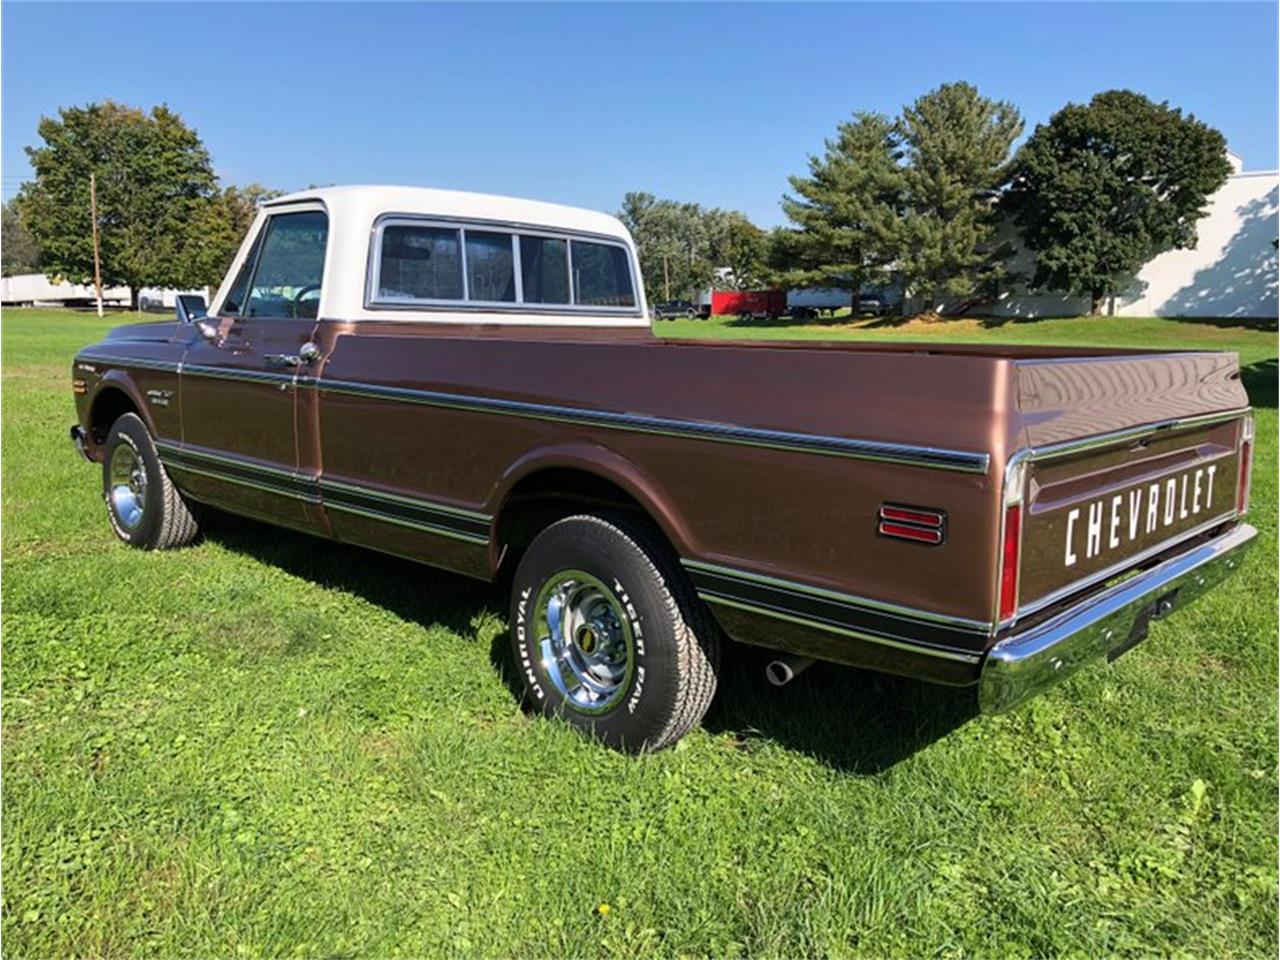 For Sale at Auction: 1970 Chevrolet C10 for sale in Saratoga Springs, NY